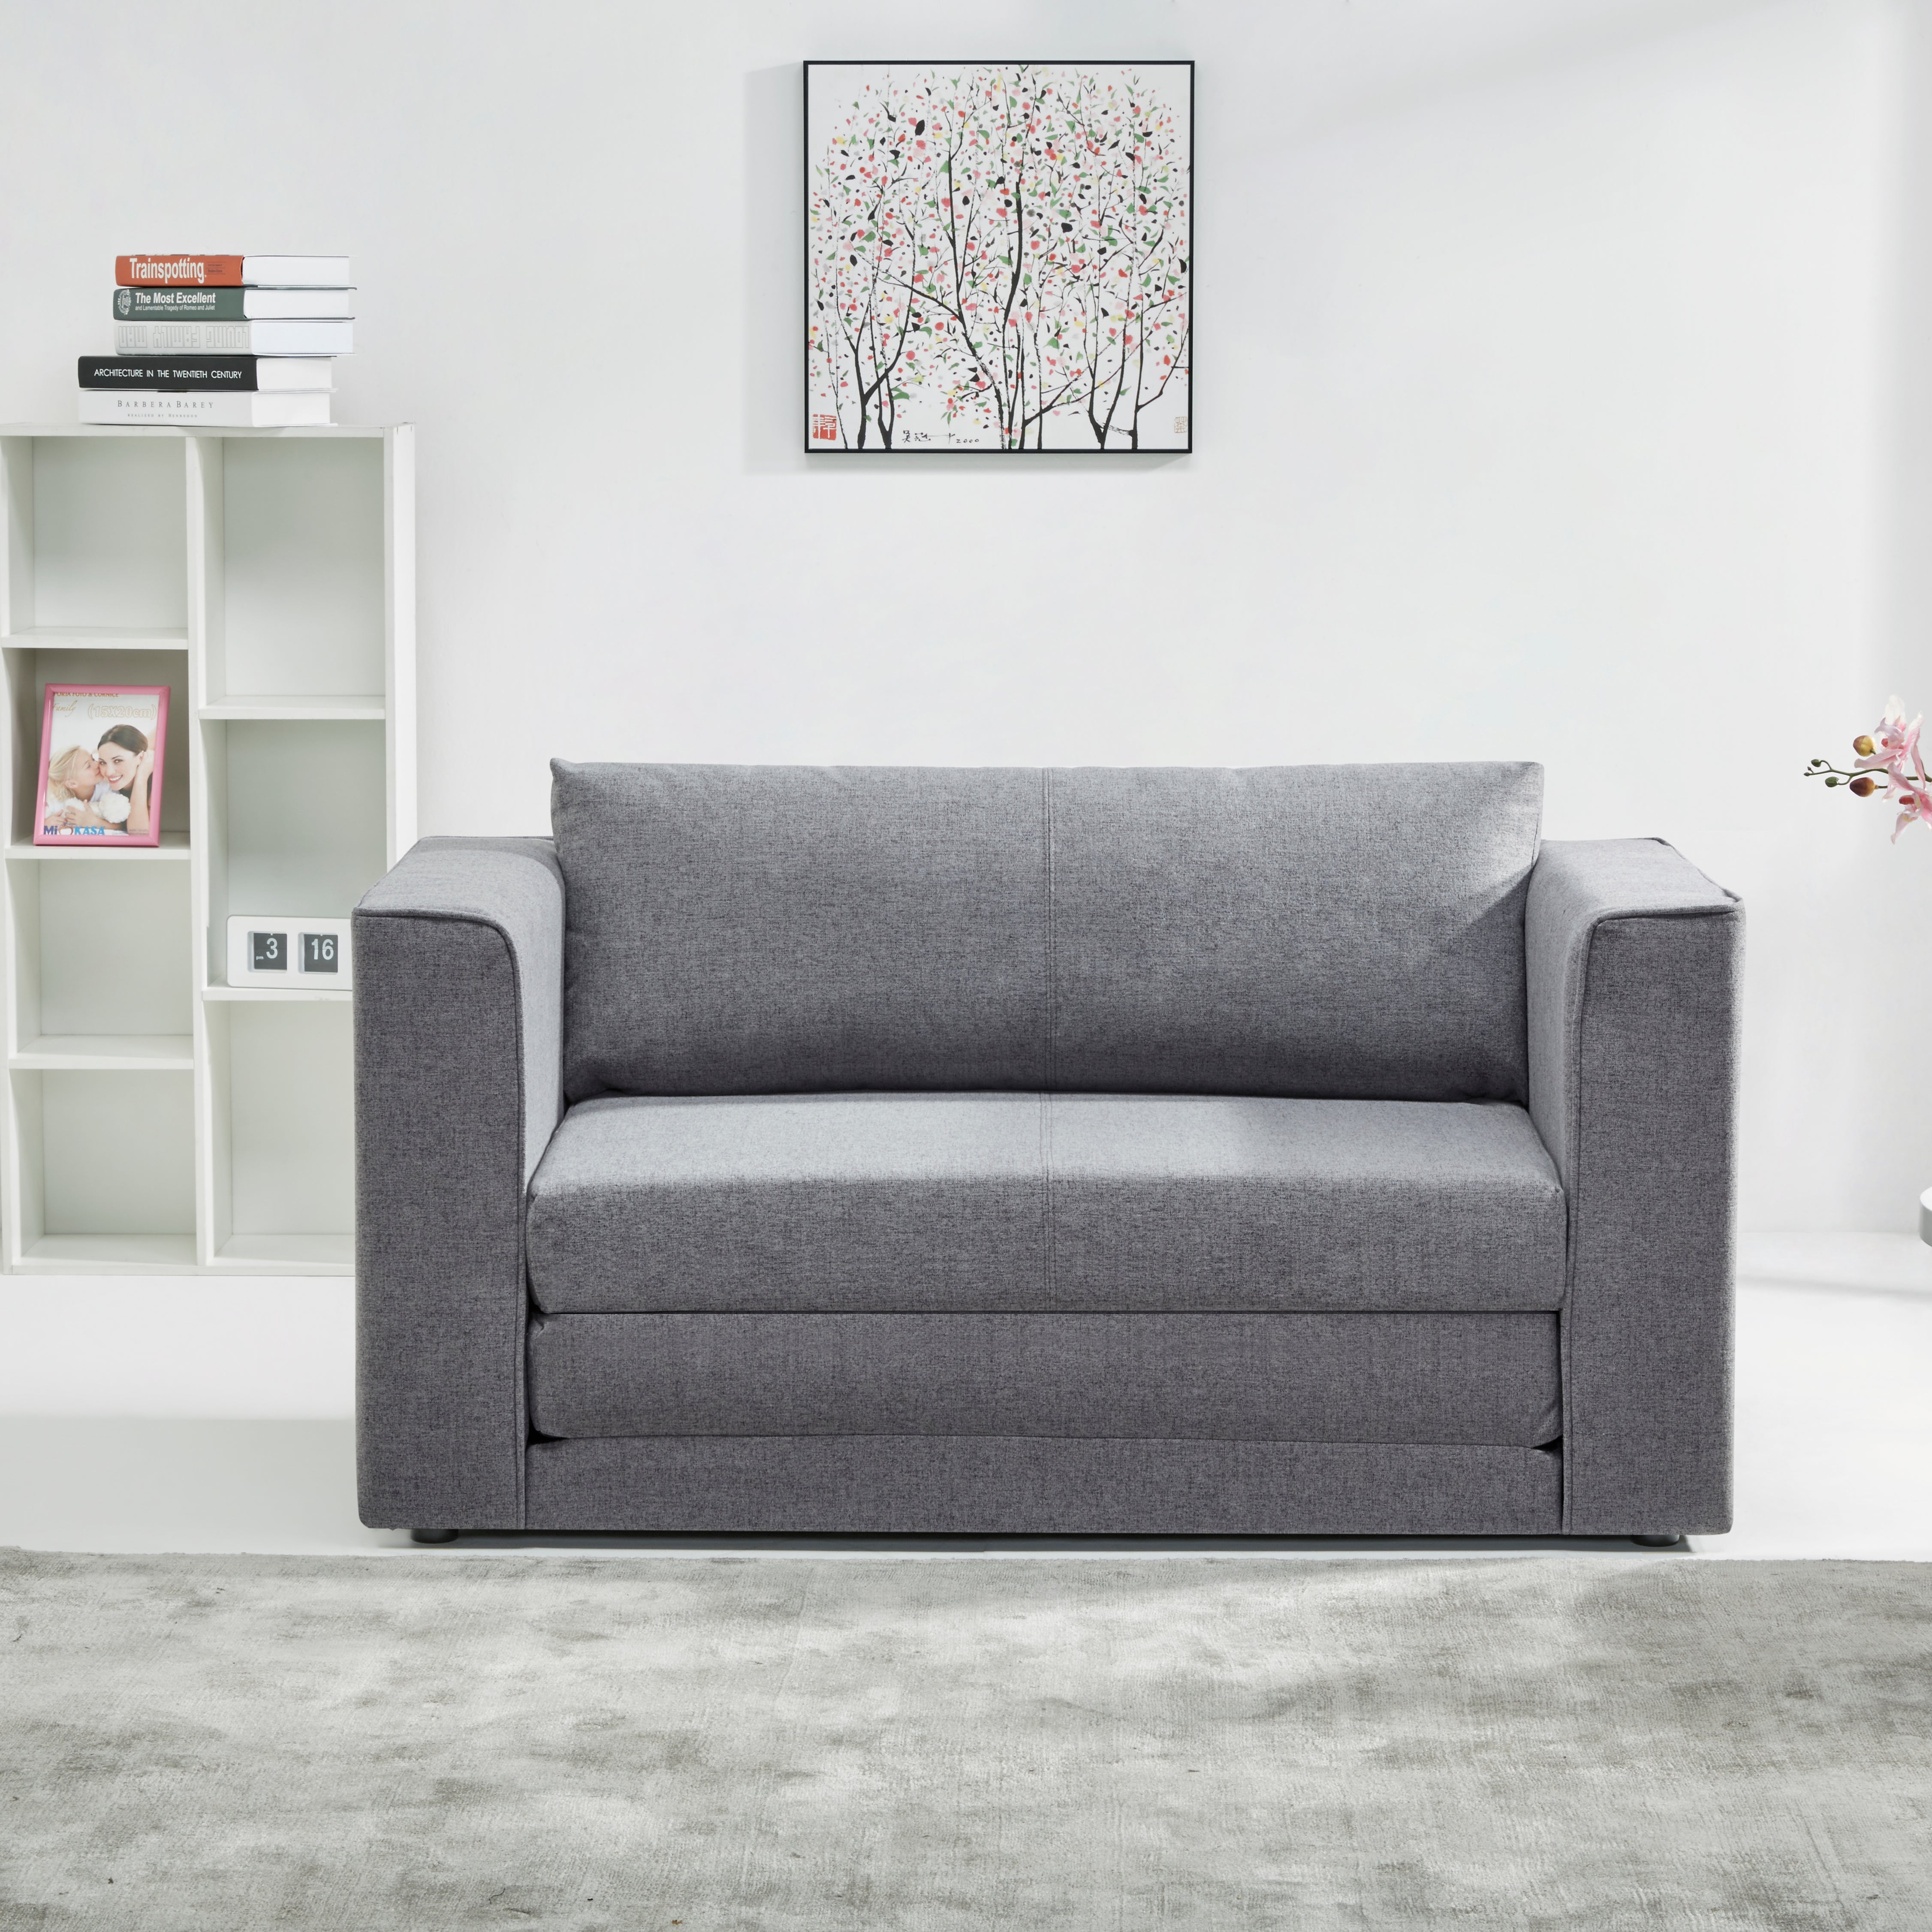 Luna Fabric Grey Compact Double Sofa Bed